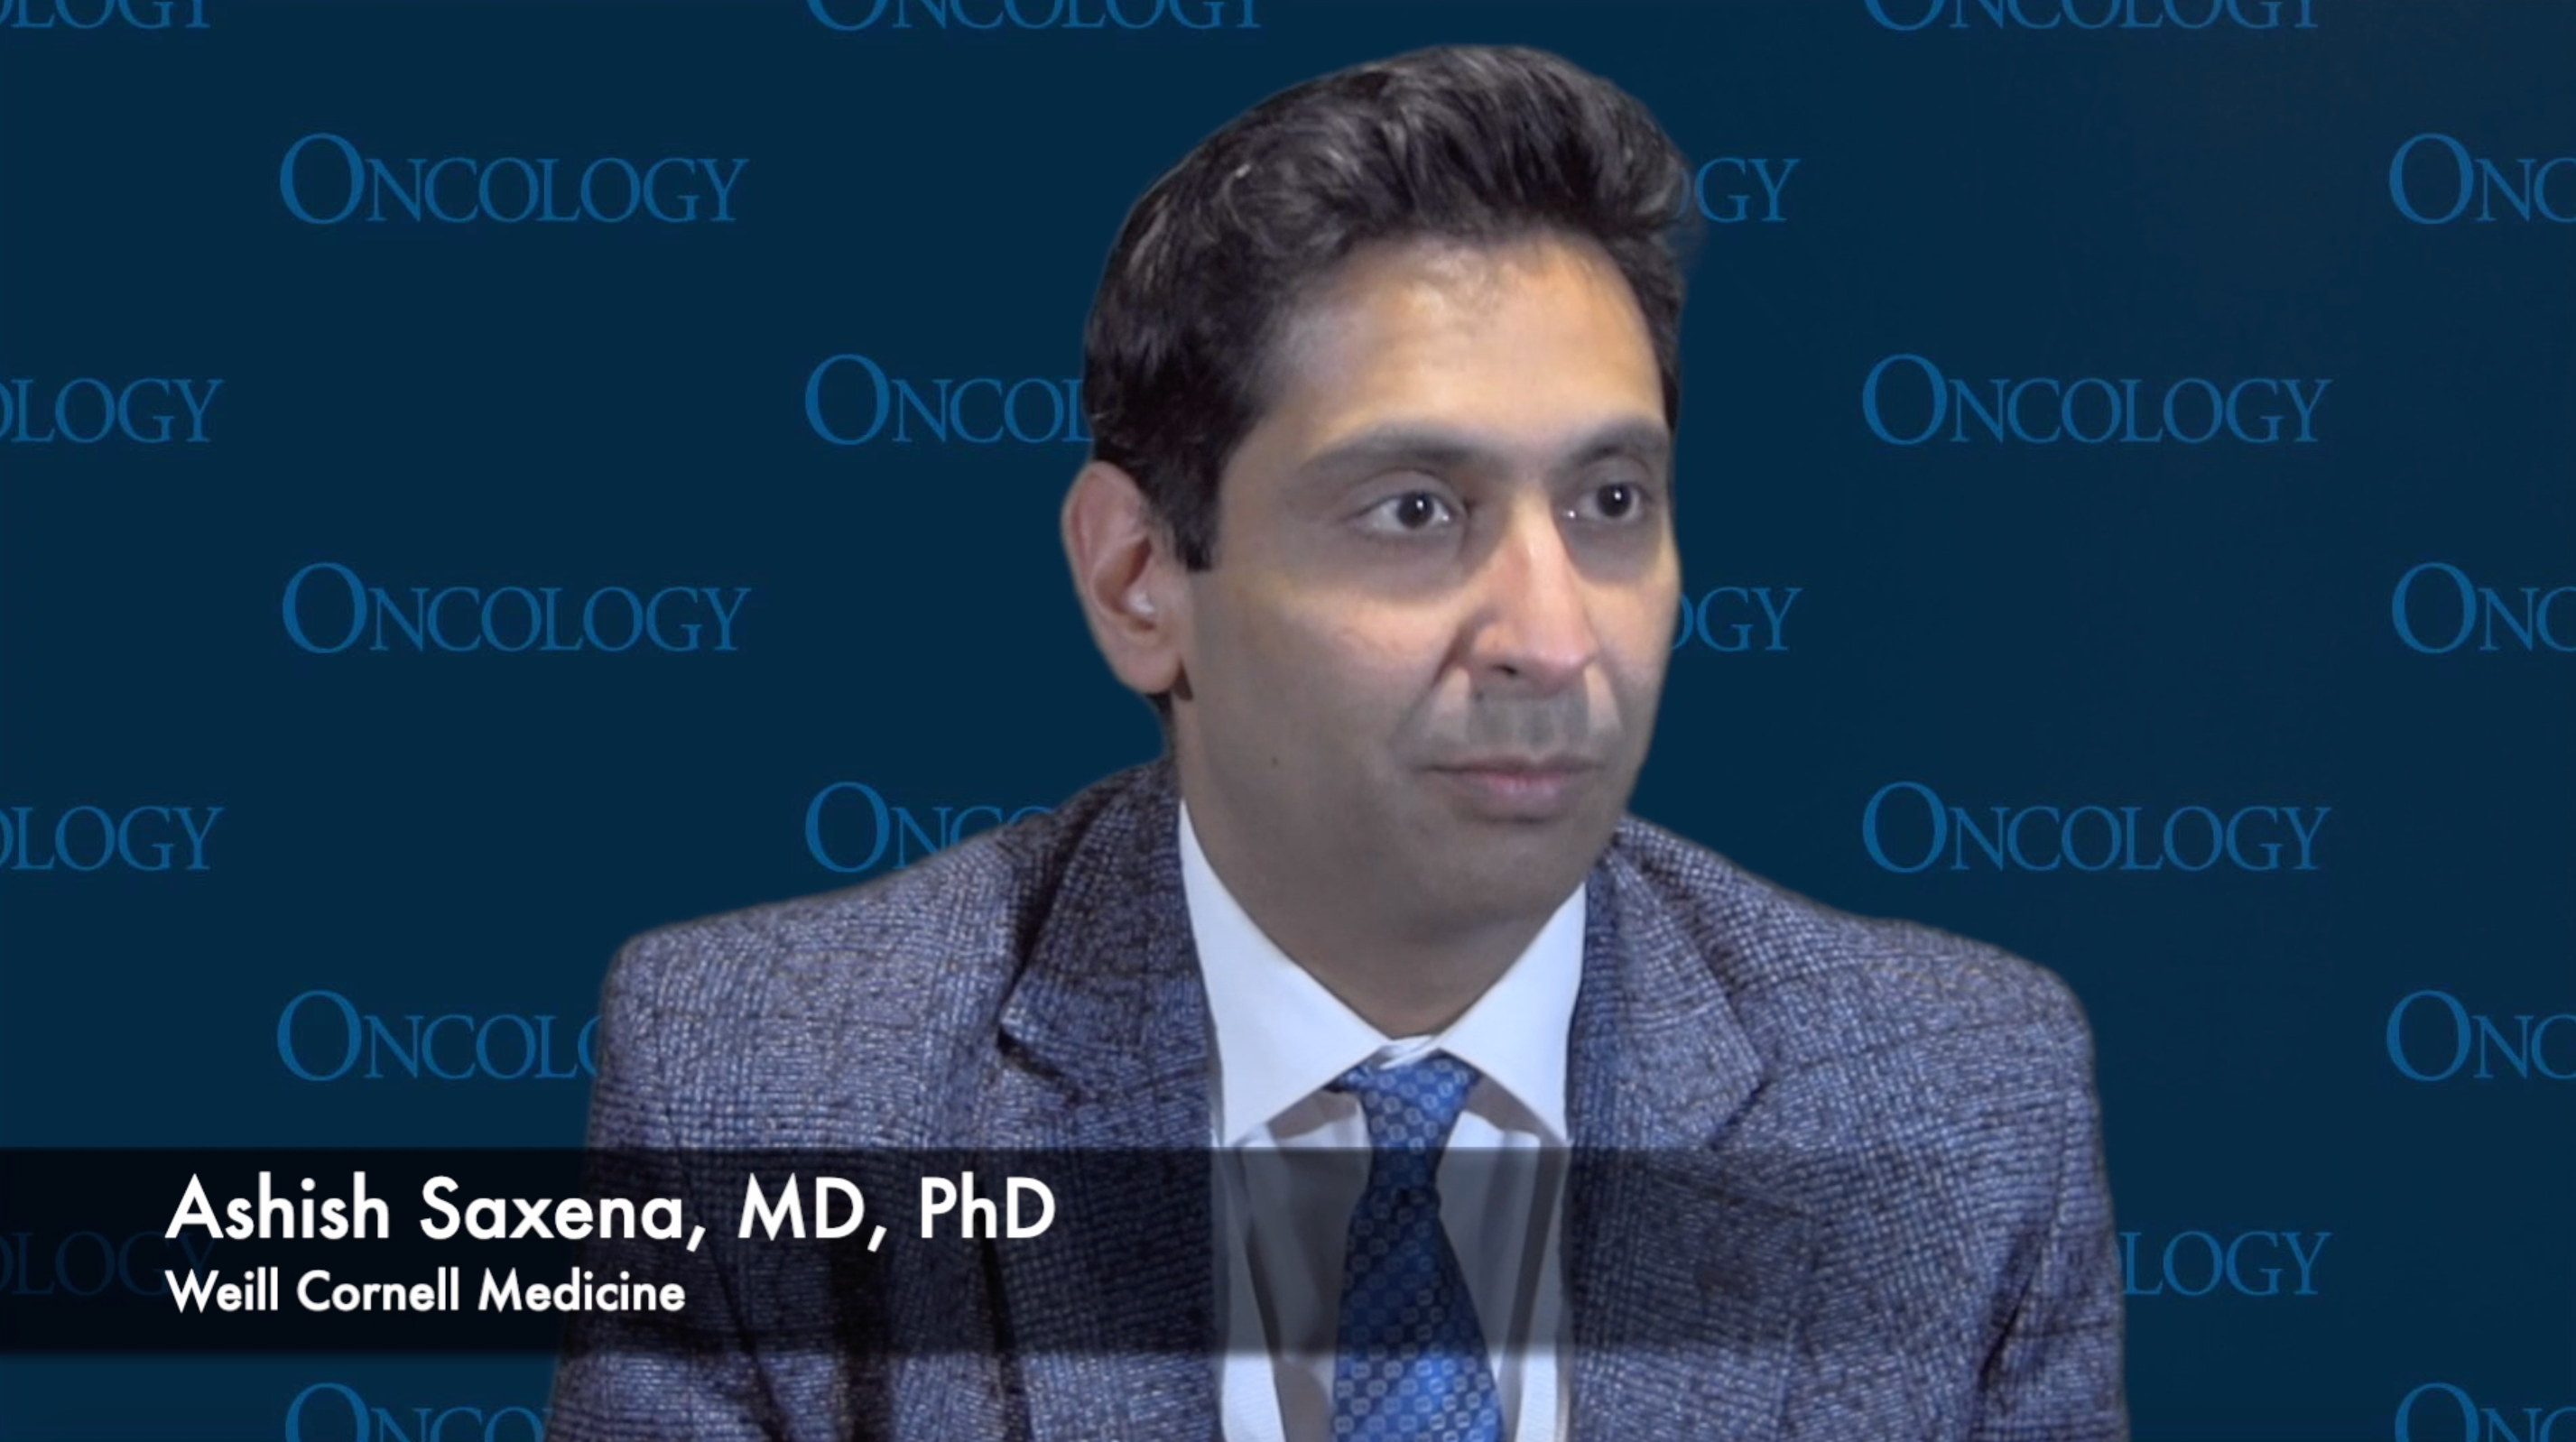 Ashish Saxena, MD, PhD Discusses Immunotherapy Drugs Effect on OS in Lung Cancer